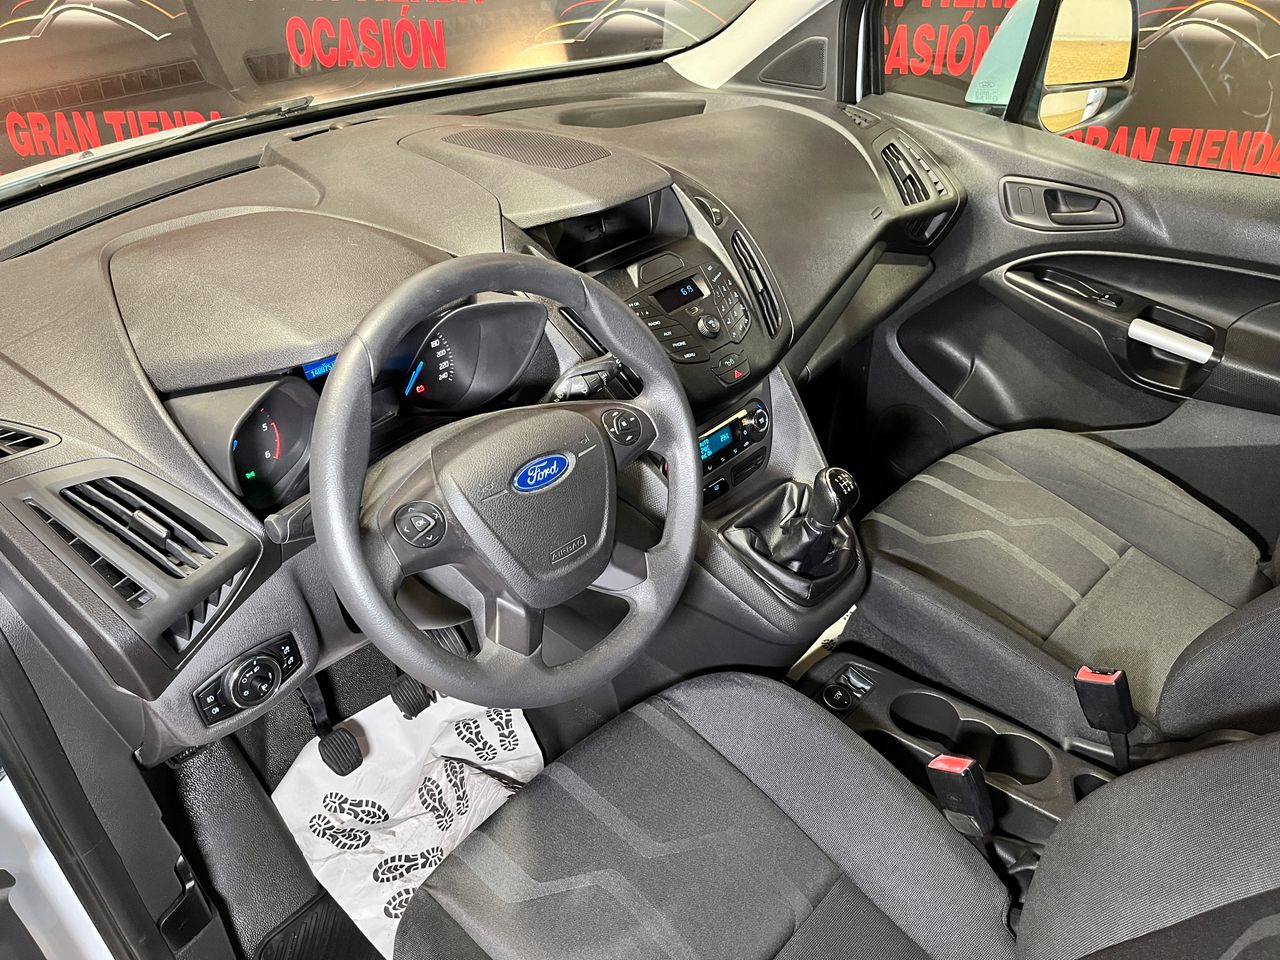 Foto Ford Transit Connect 17